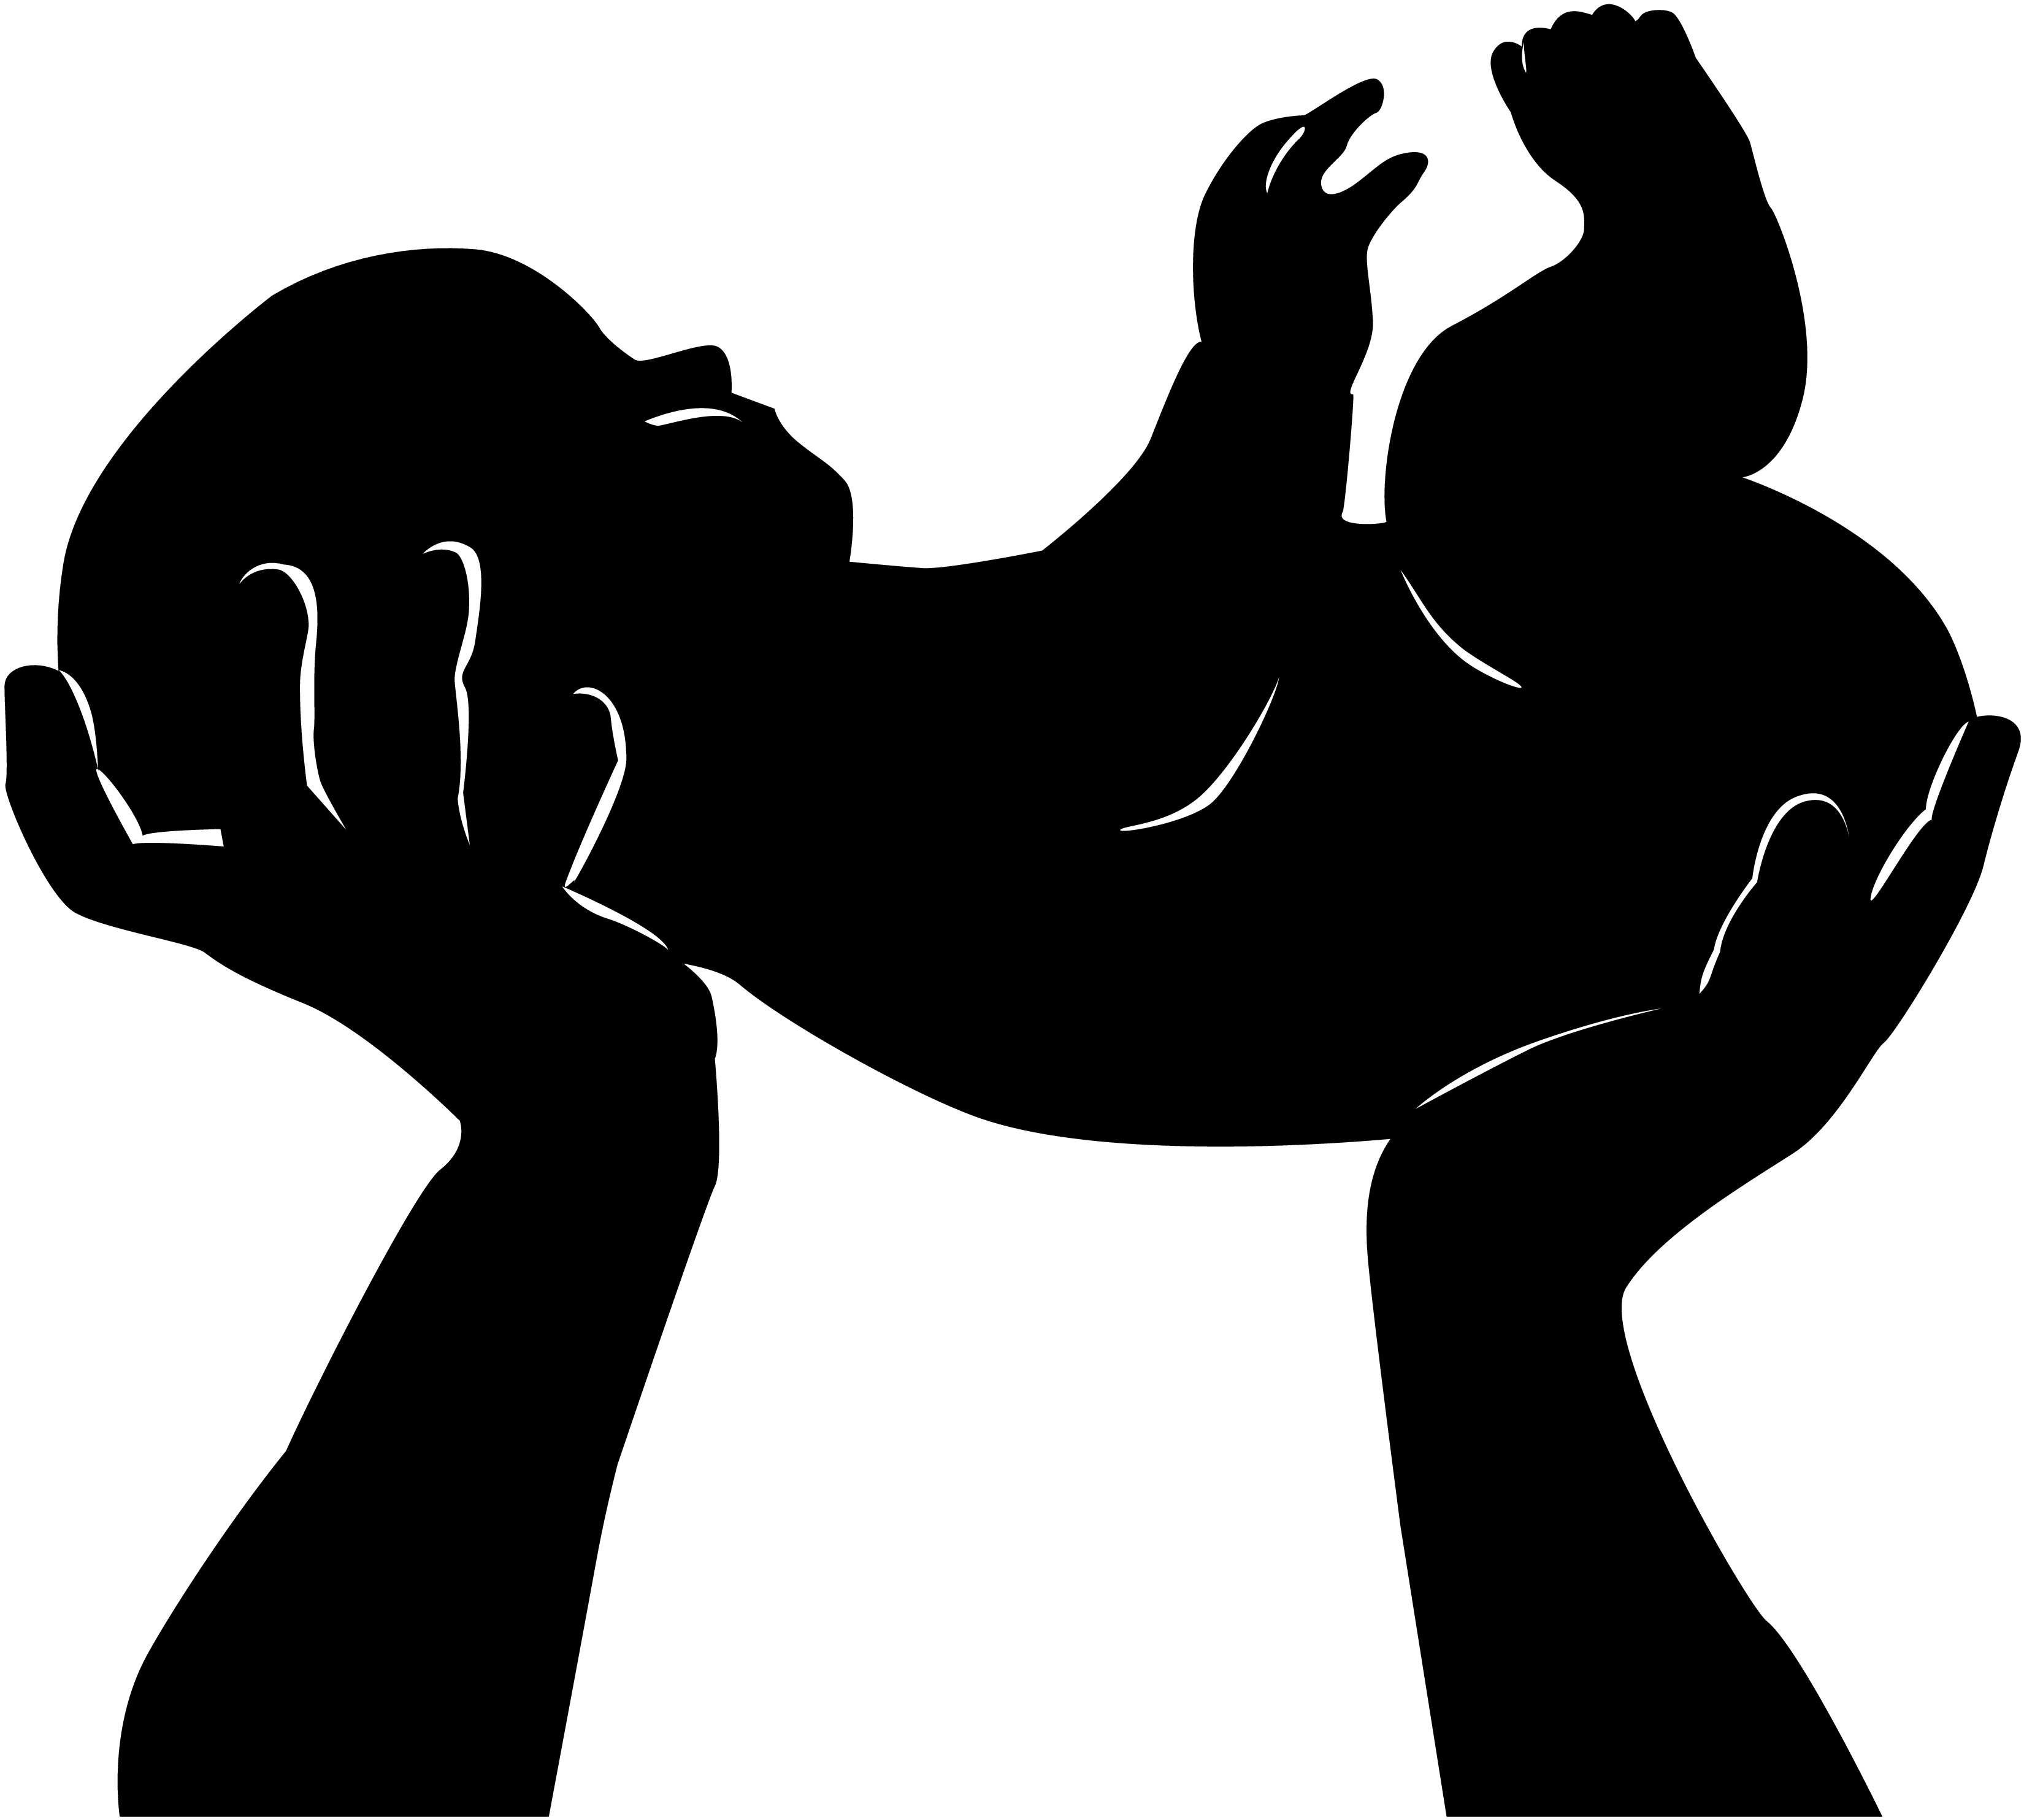 Baby feet silhouette. 3 baby feet silhouette. Free cliparts that you can download to you computer and use in your designs. Baby Silhouette